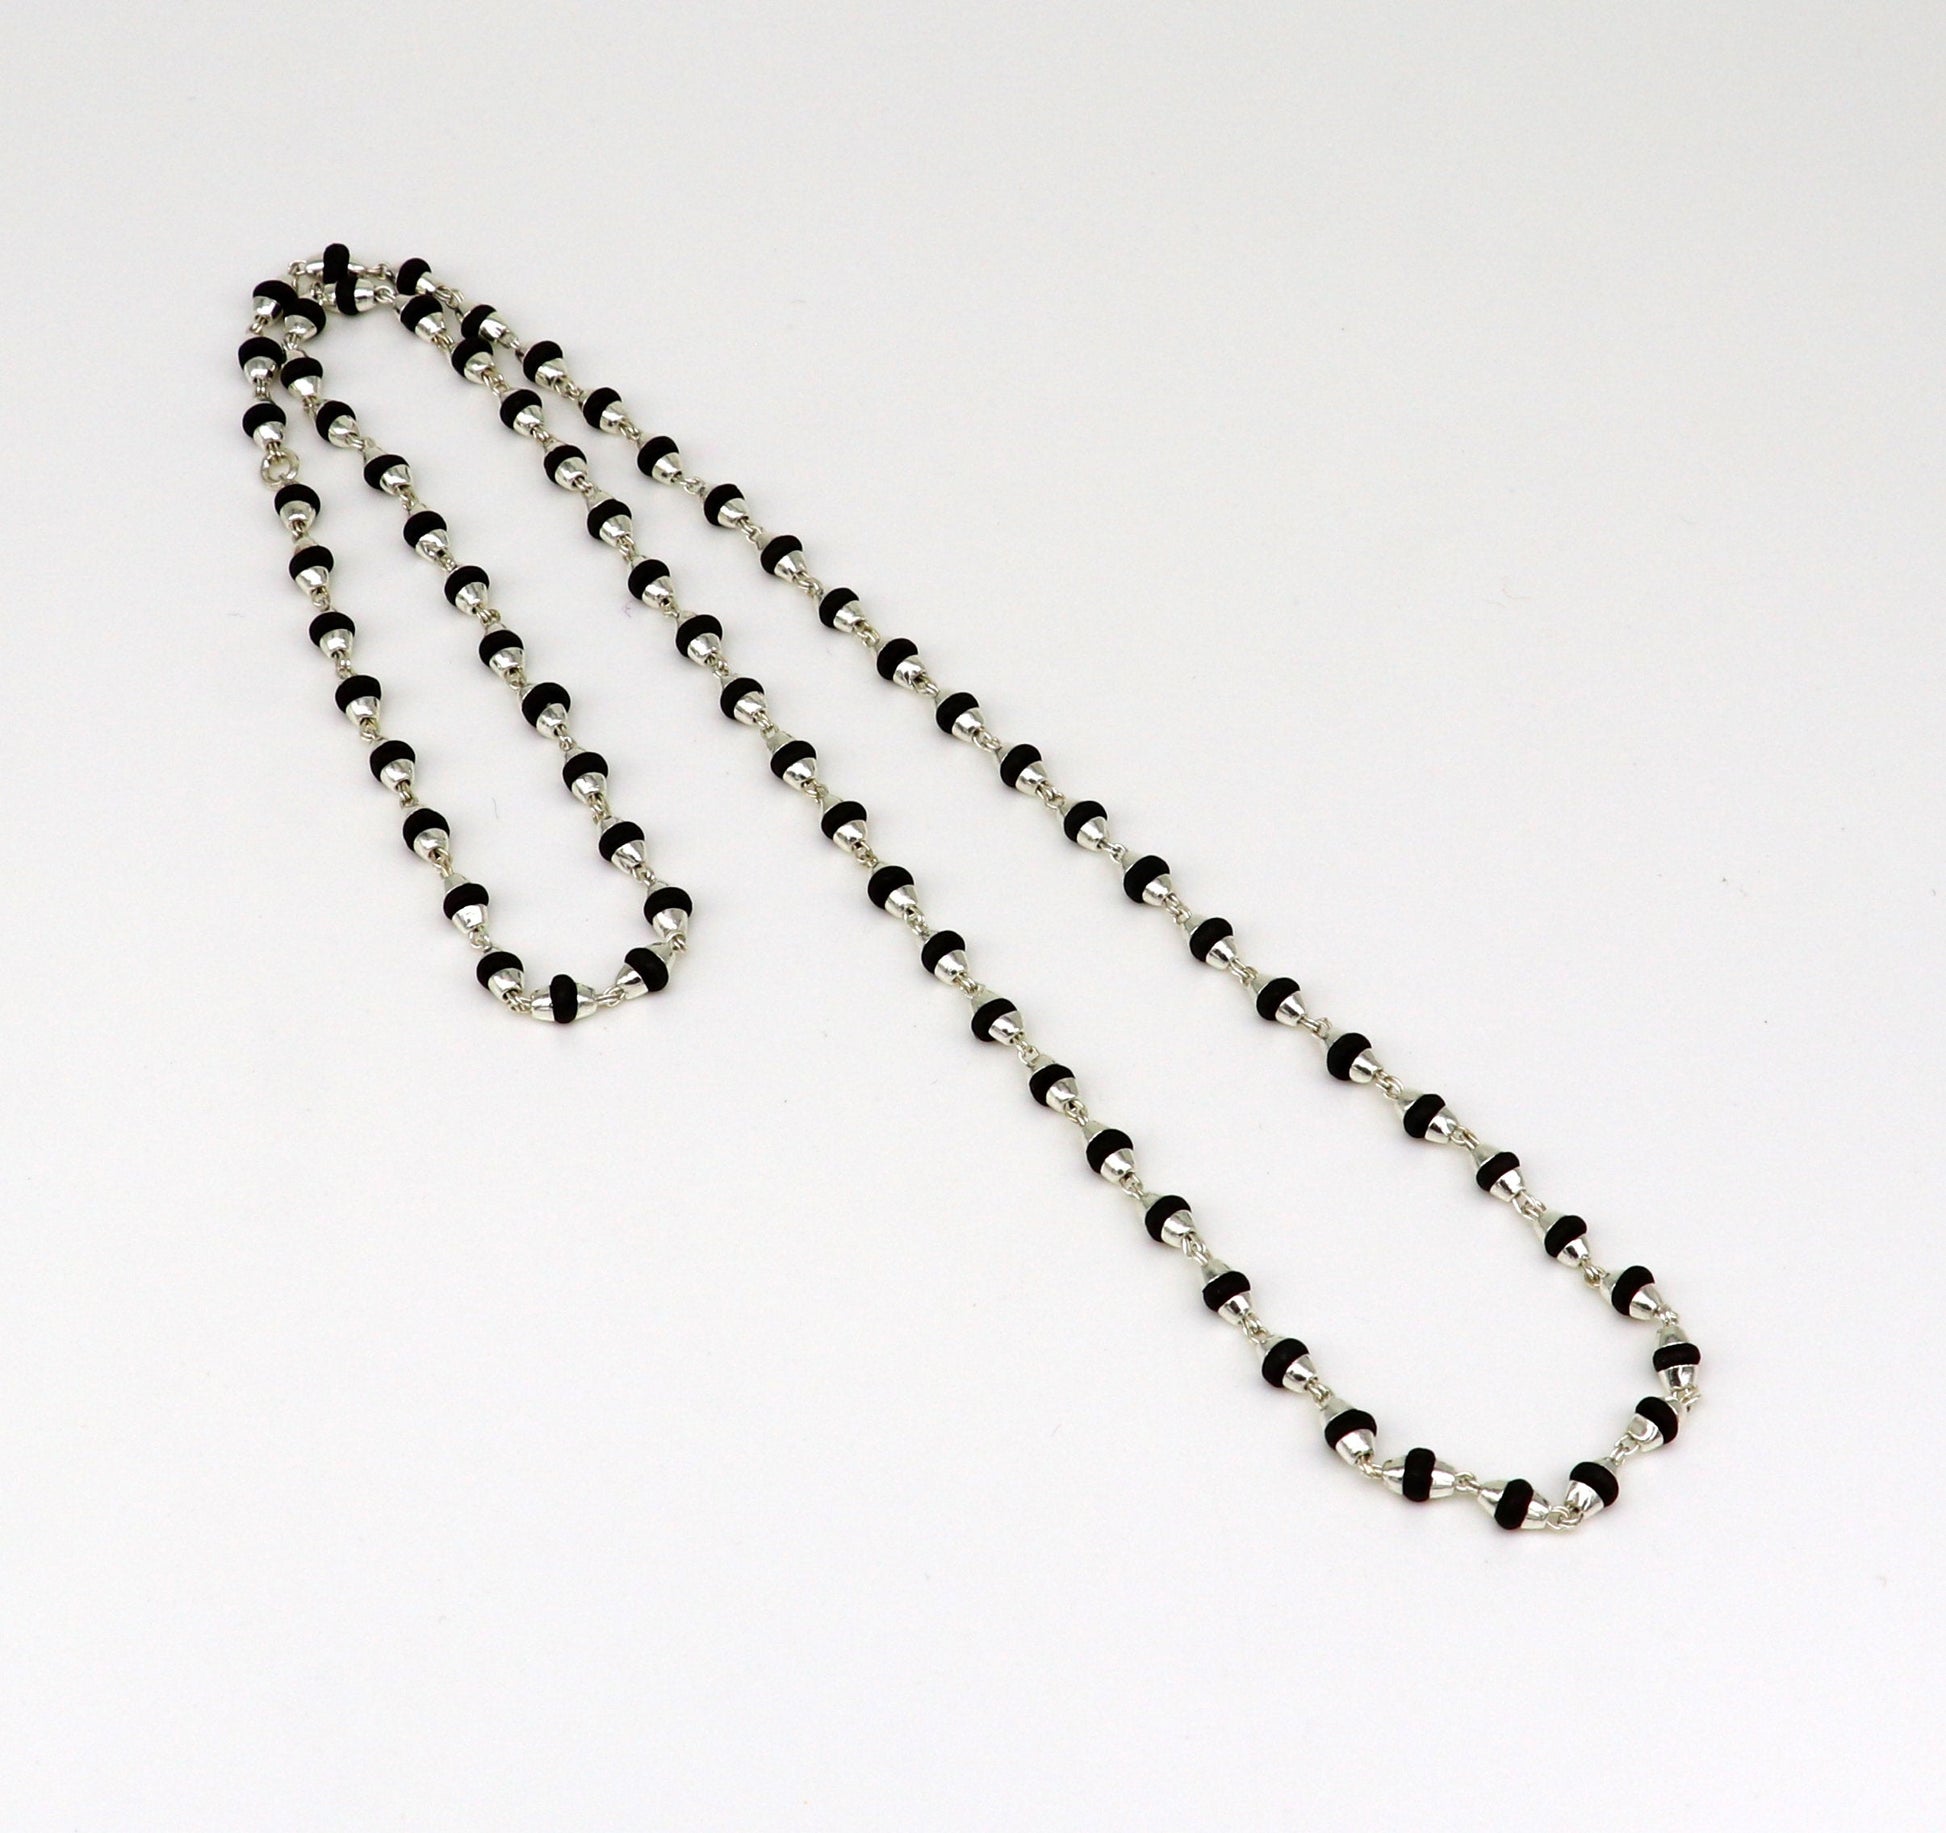 Basil Rosary Tulsi Bead Mala chain size 24 inch 4 mm width pure sterling silver 92.5 with silver side cap and handmade Knot (Guthai) - TRIBAL ORNAMENTS